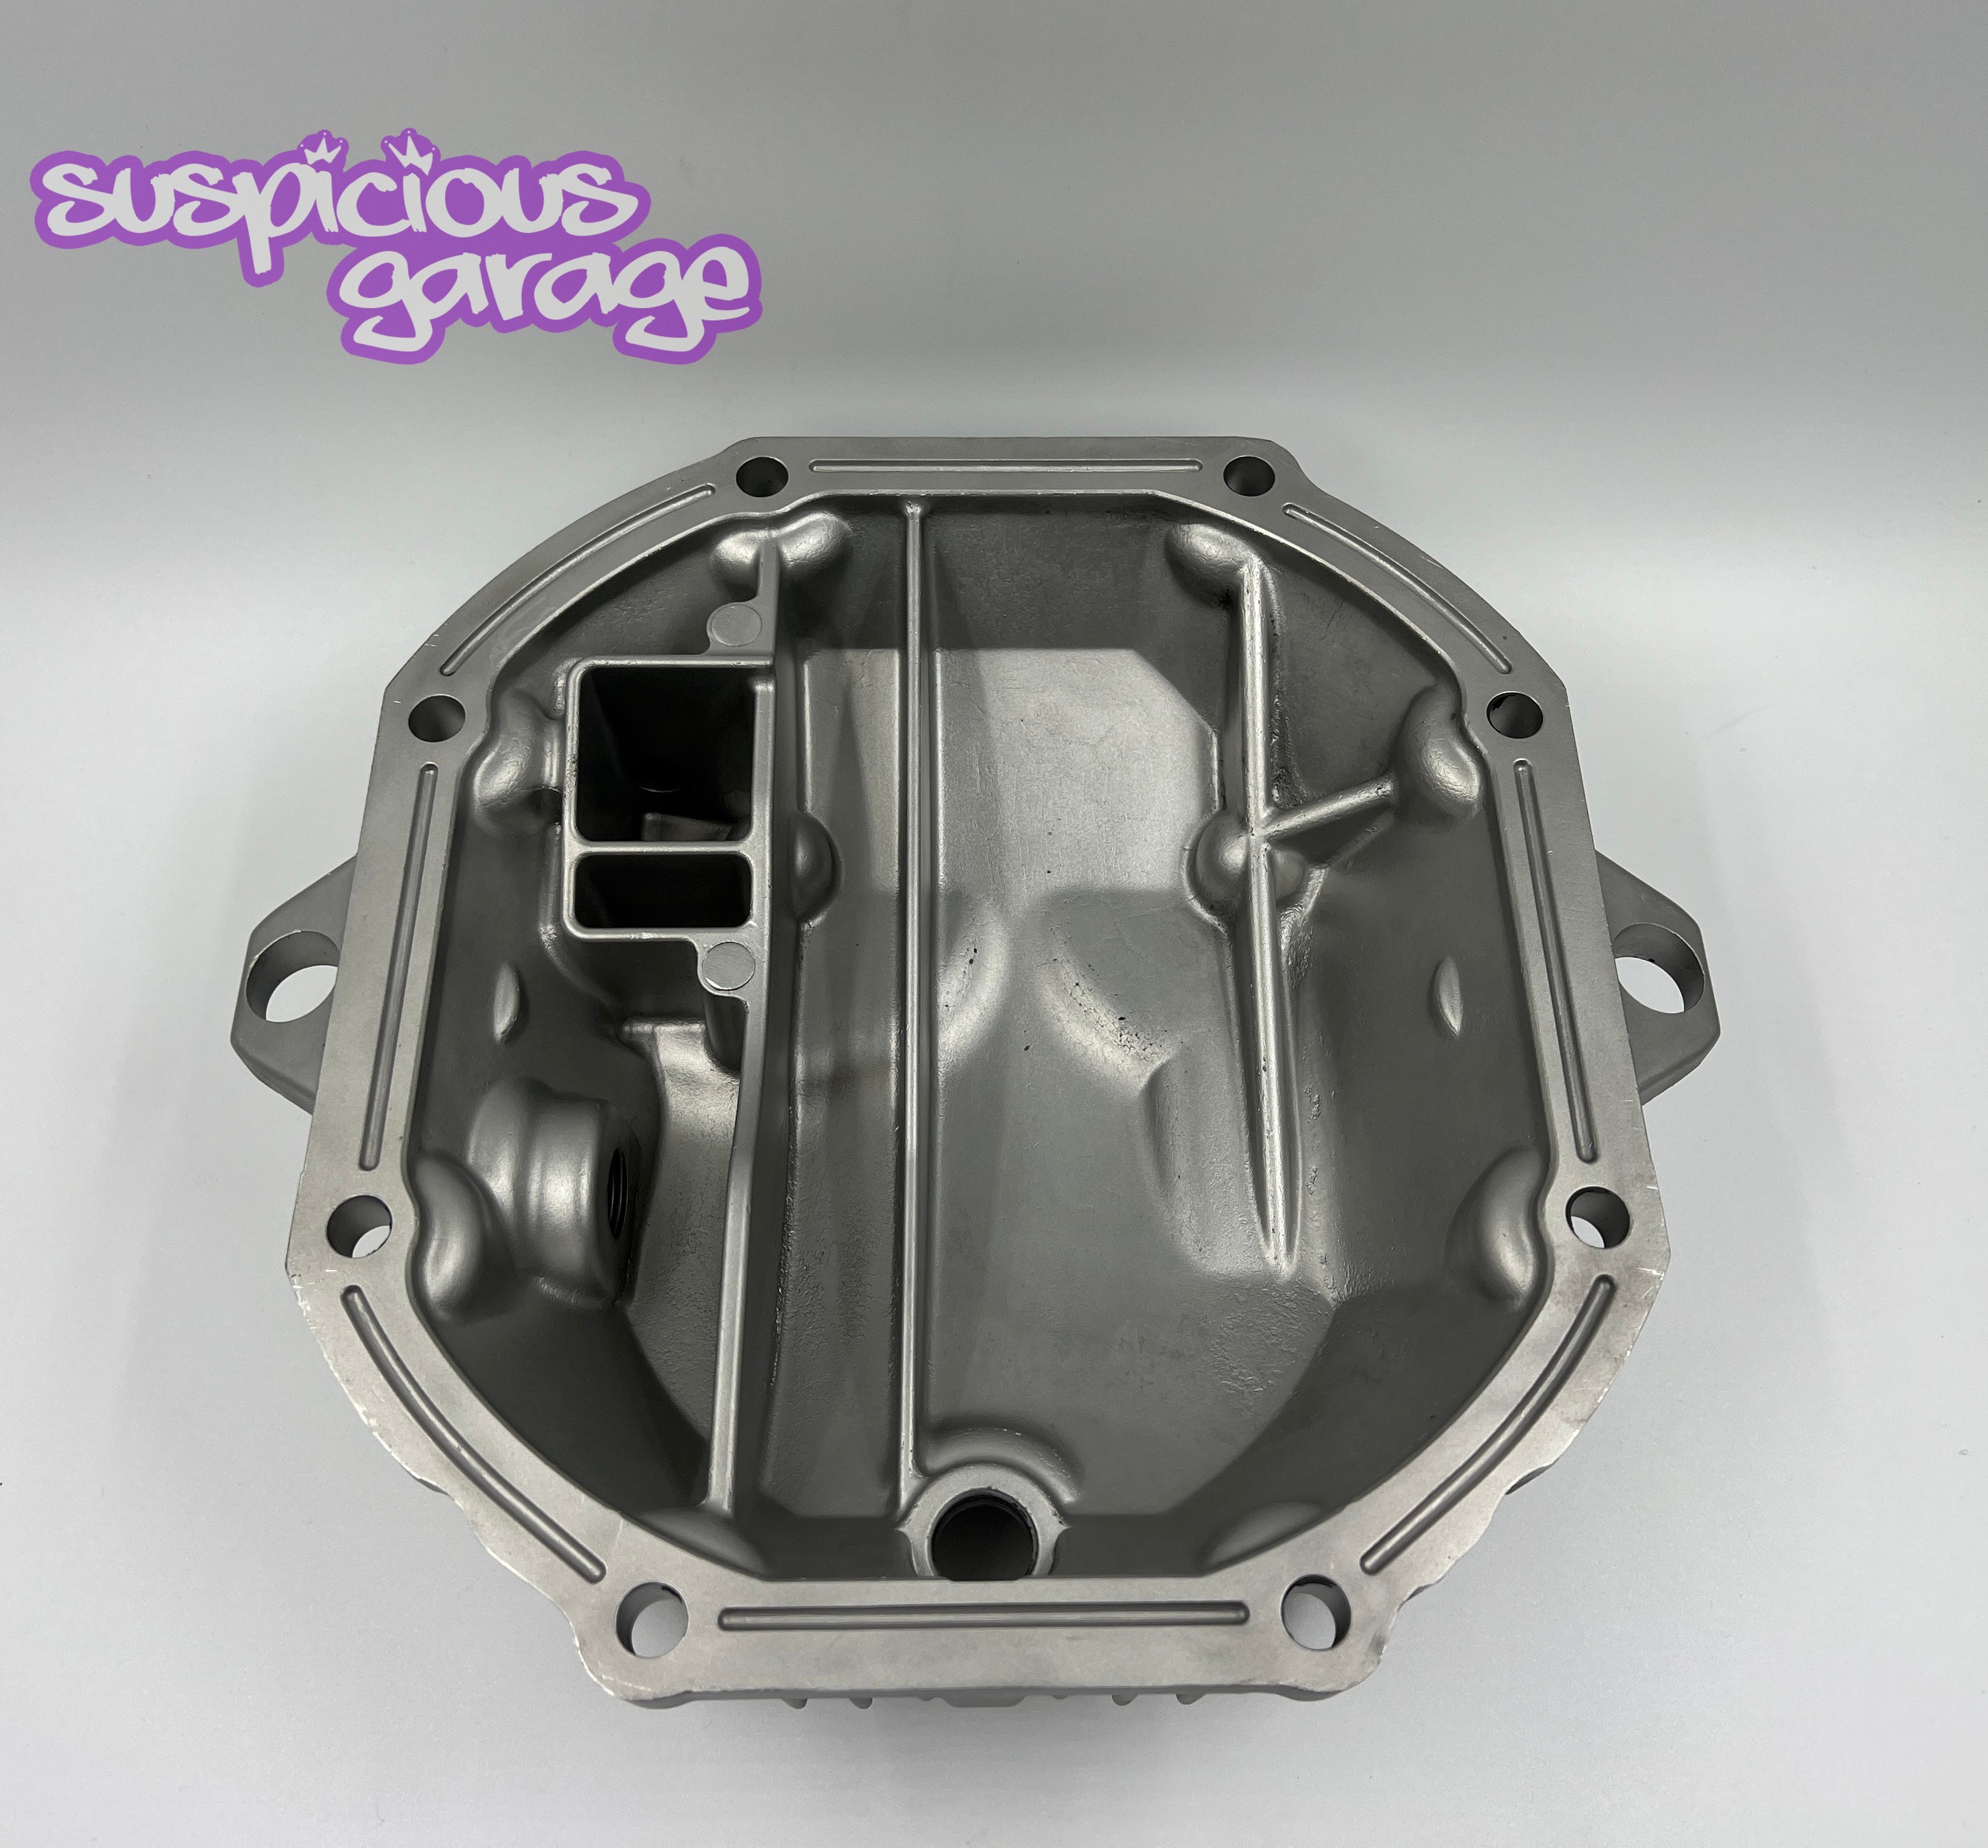 2005-2012 Nissan Pathfinder OEM Differential Cover For S14/15 Using Z33/34 Rear Diff